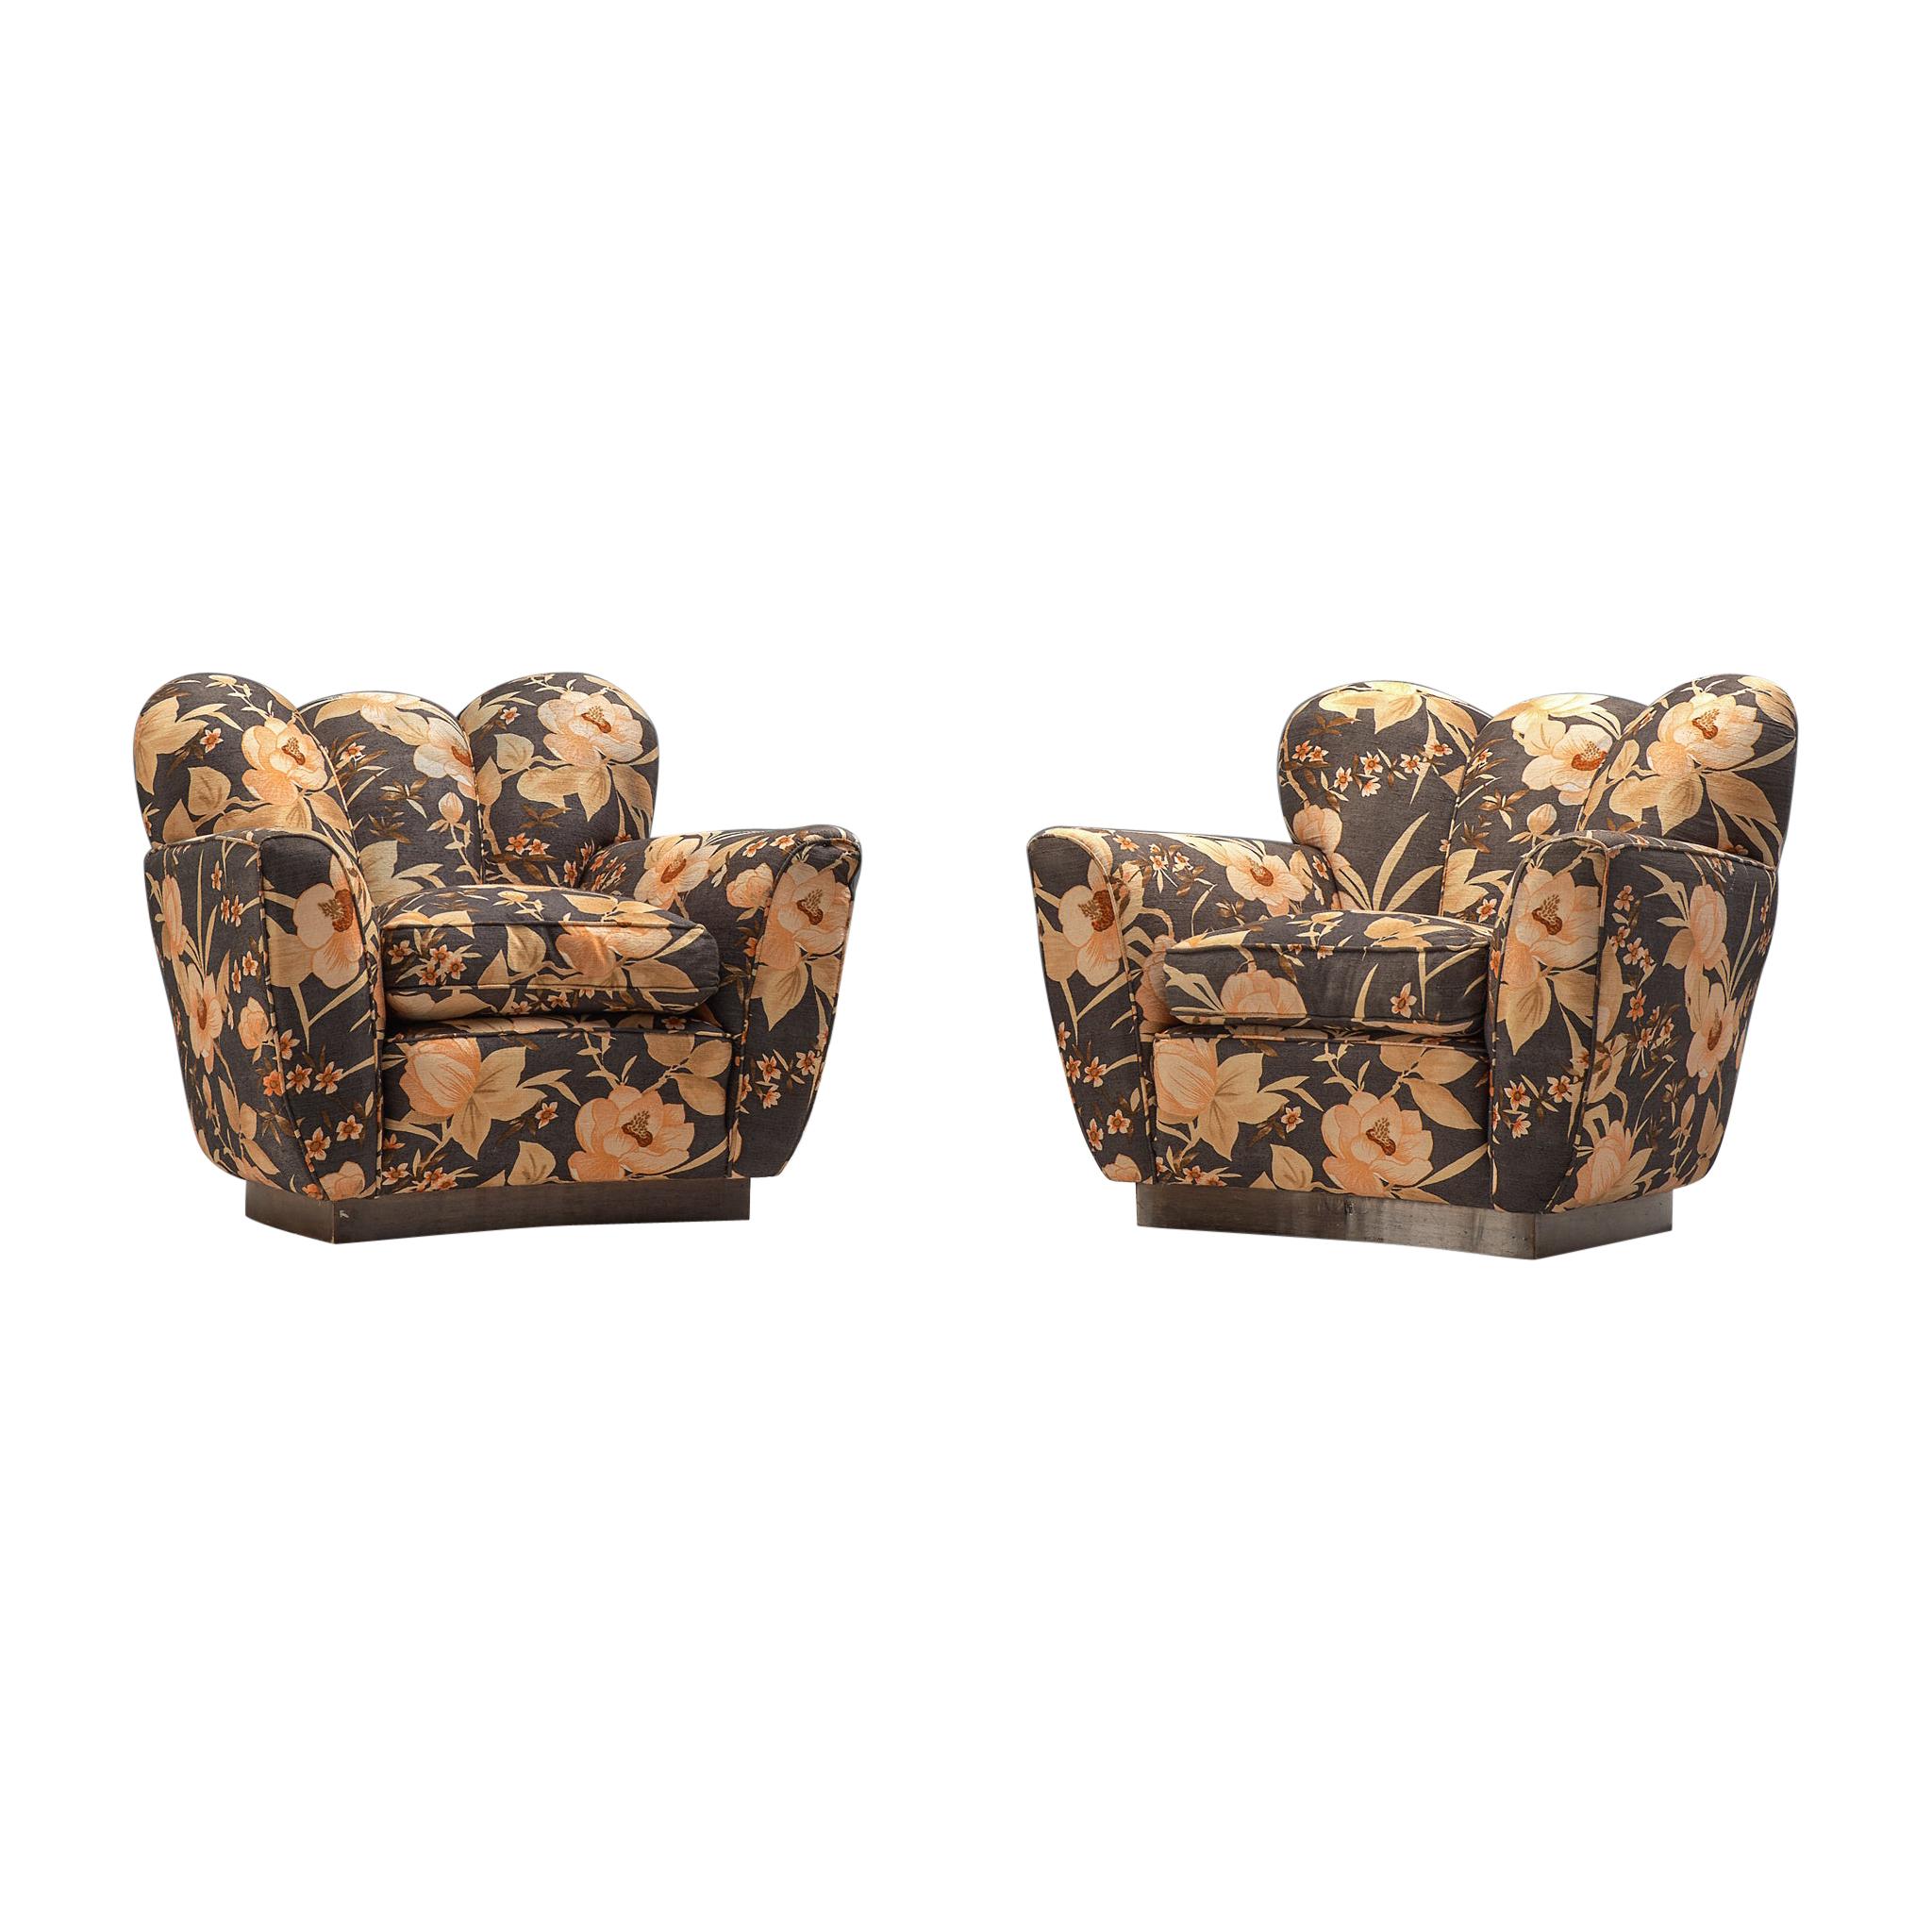 Italian Pair of Lounge Chairs in Floral Upholstery by Molteni